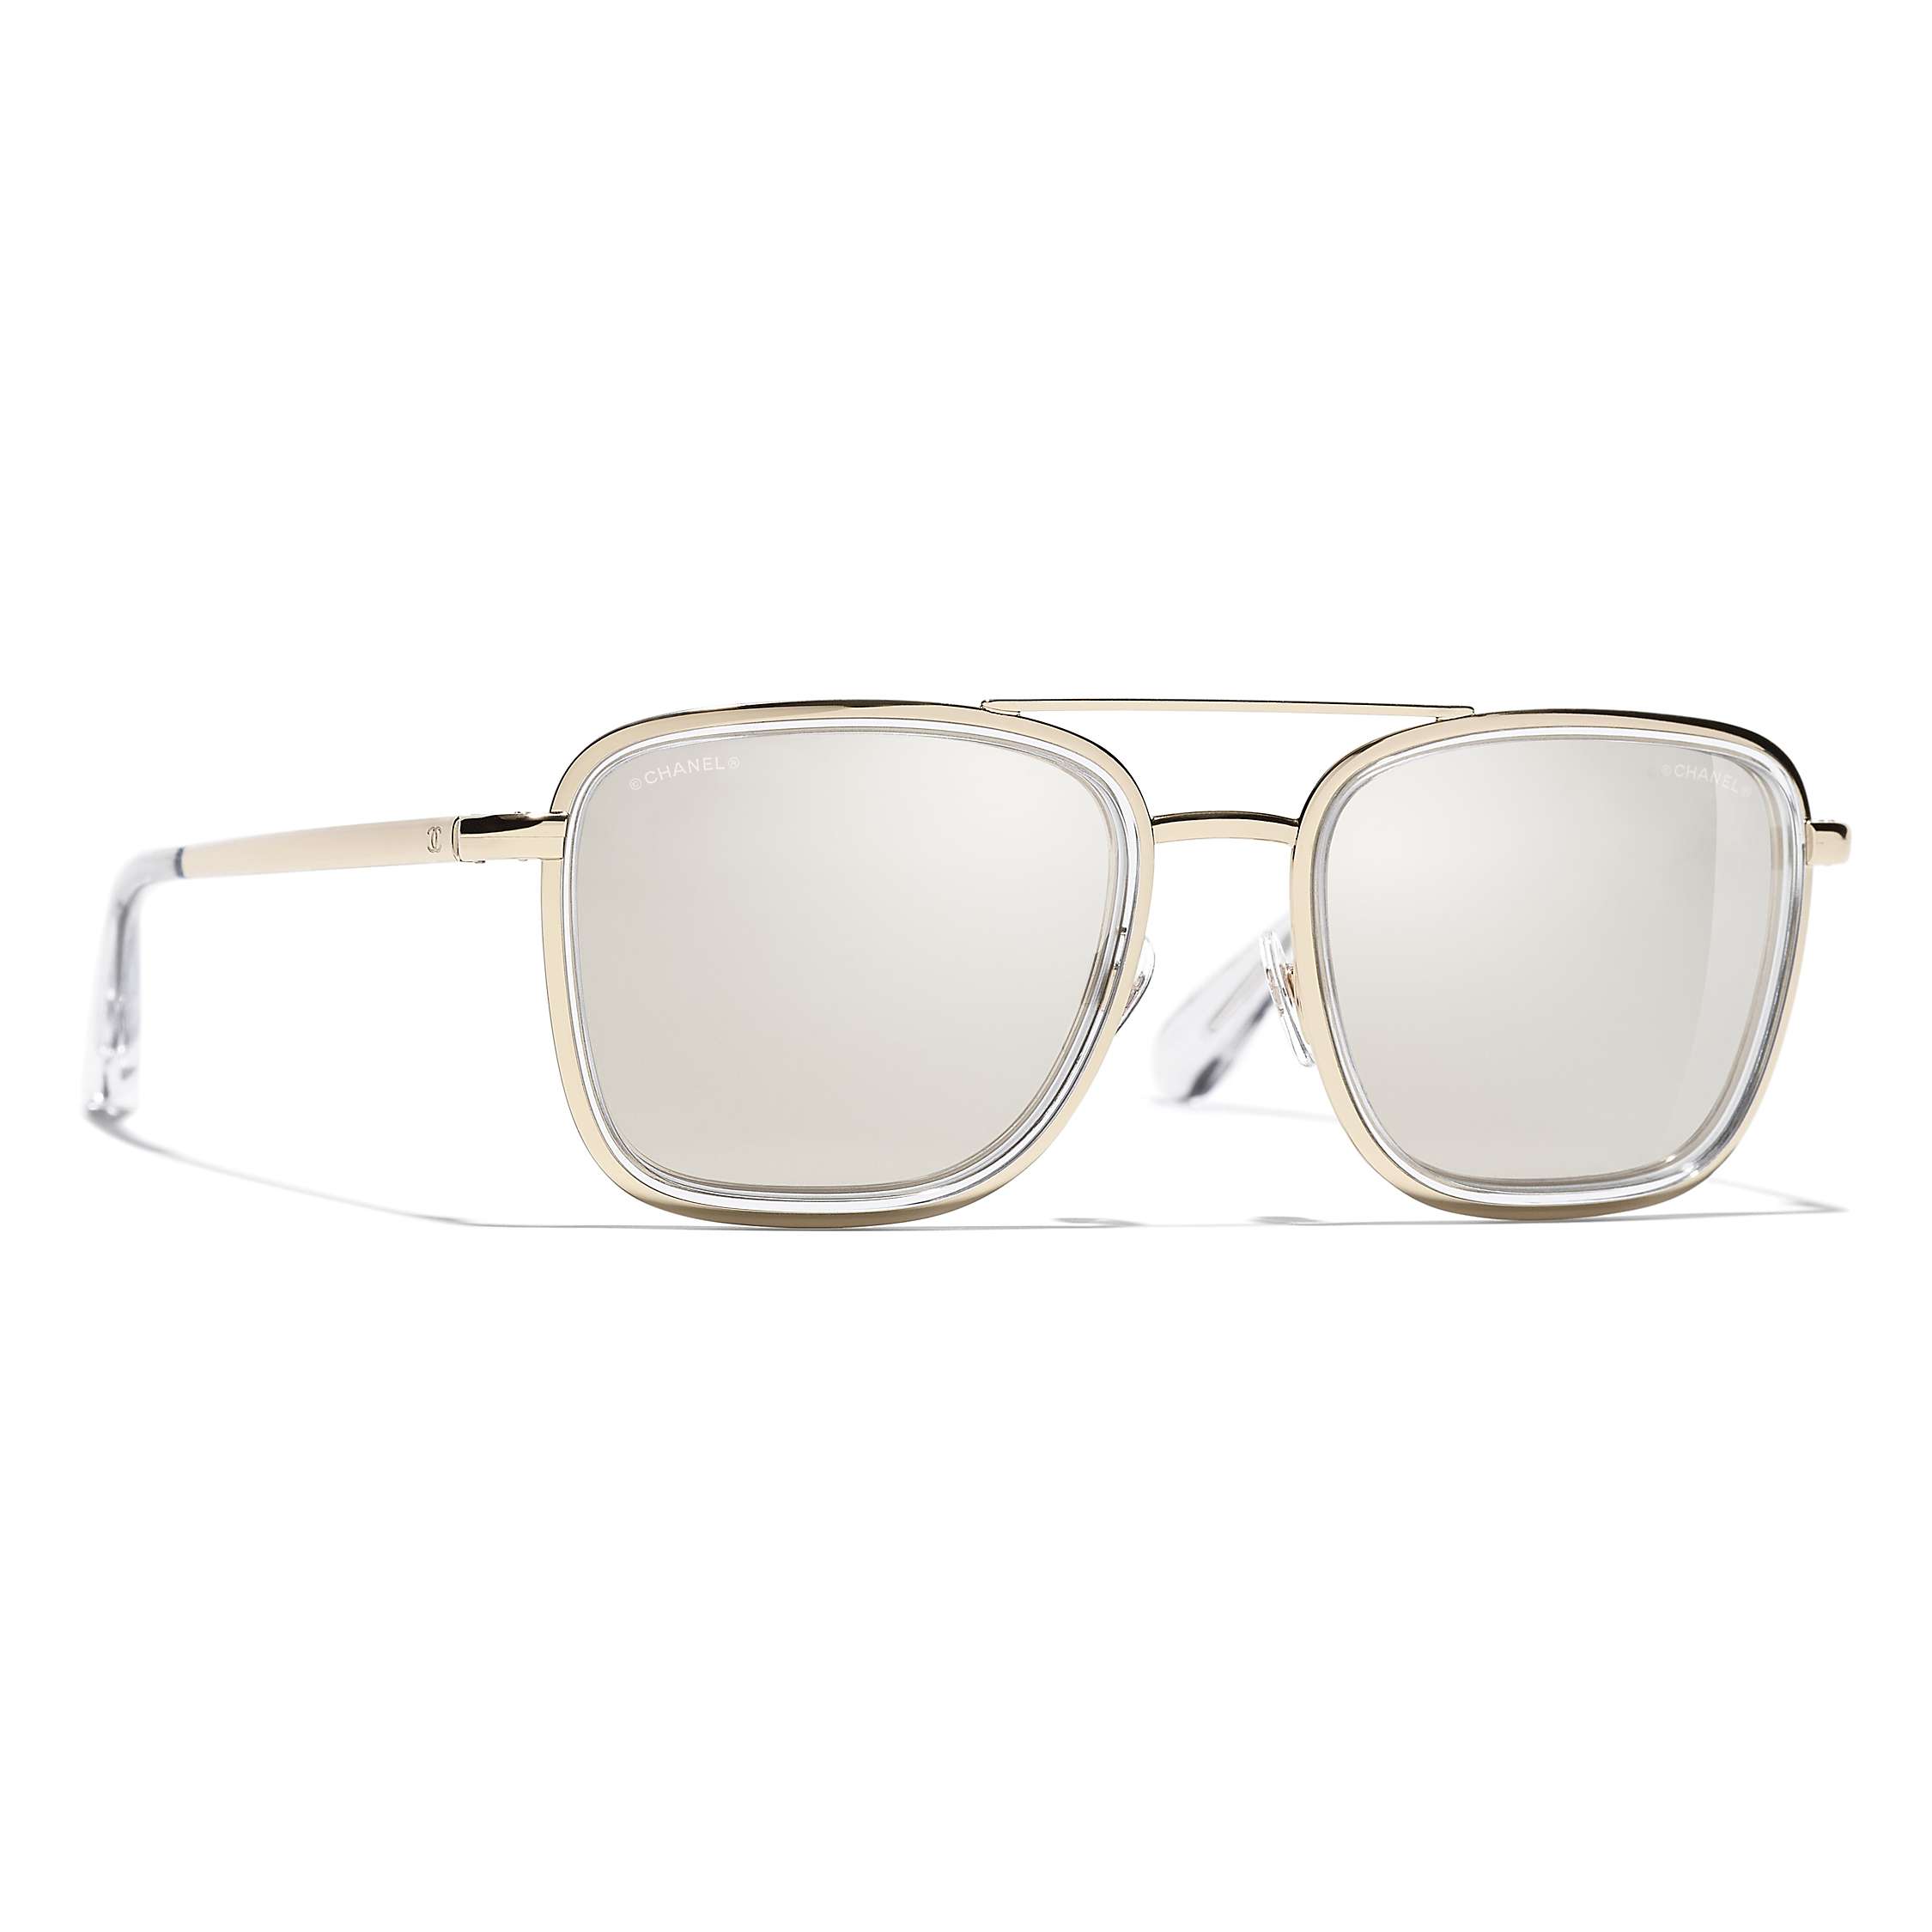 Buy CHANEL Square Sunglasses CH4241 Light Gold/Mirror Gold Online at johnlewis.com